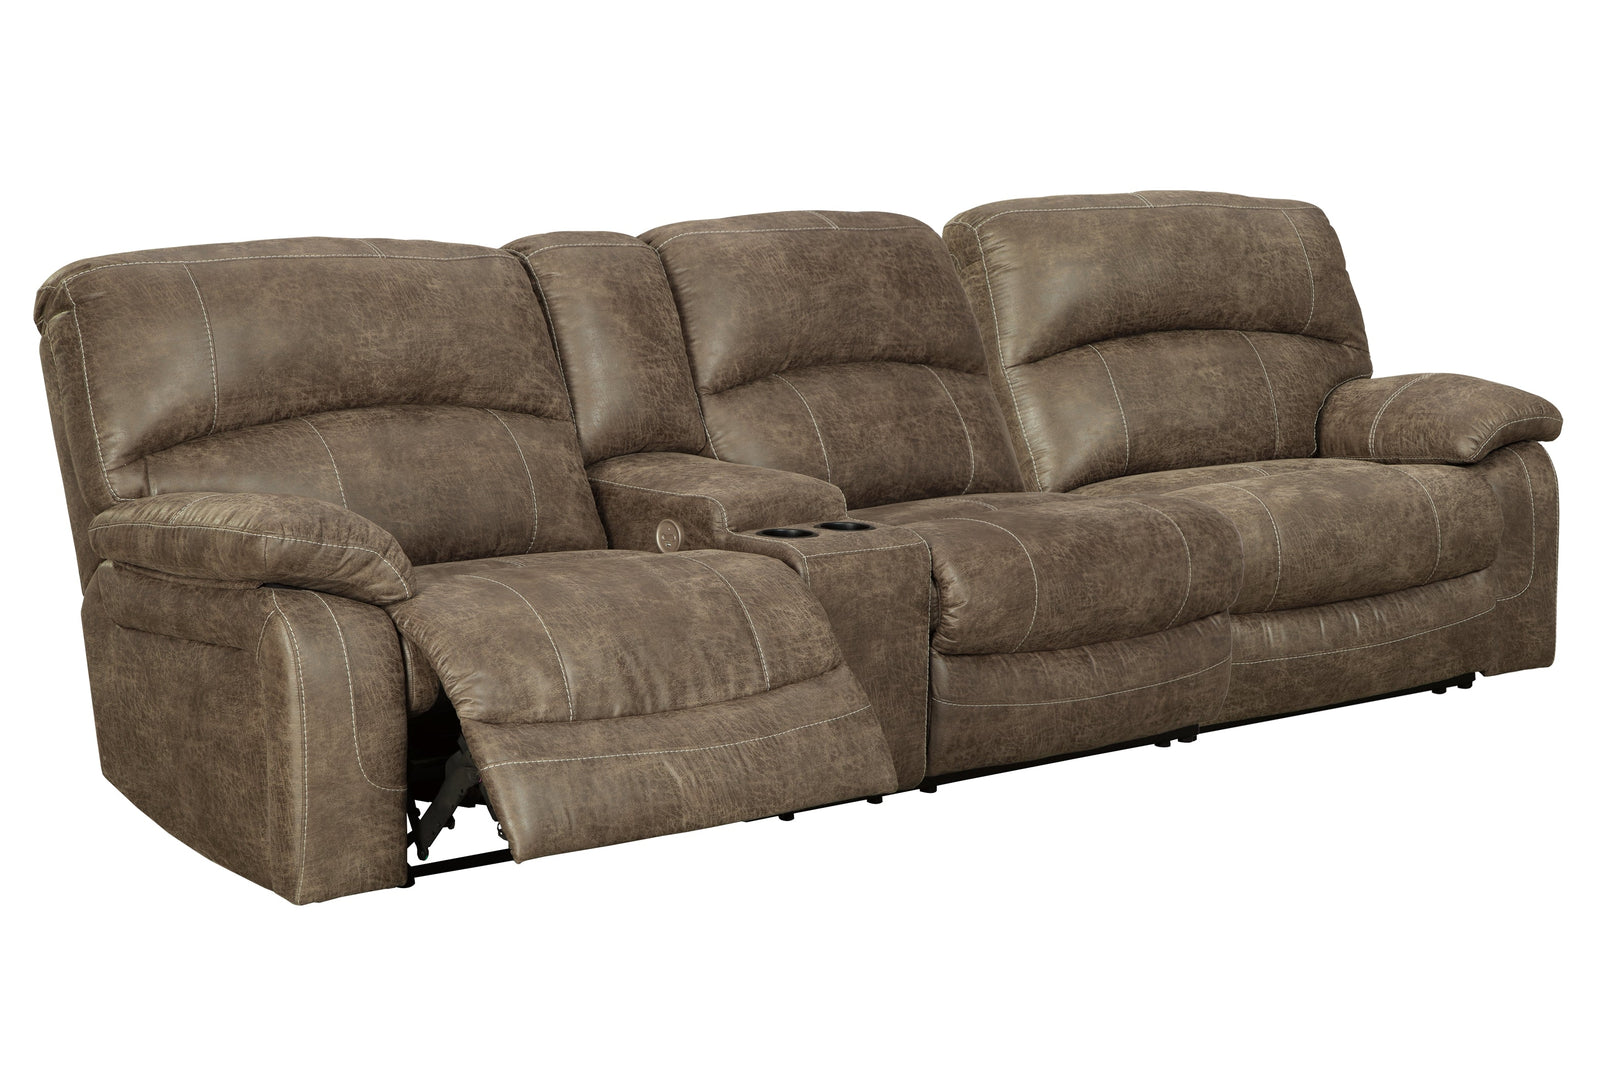 Segburg Driftwood Faux Leather 2-Piece Power Reclining Sectional